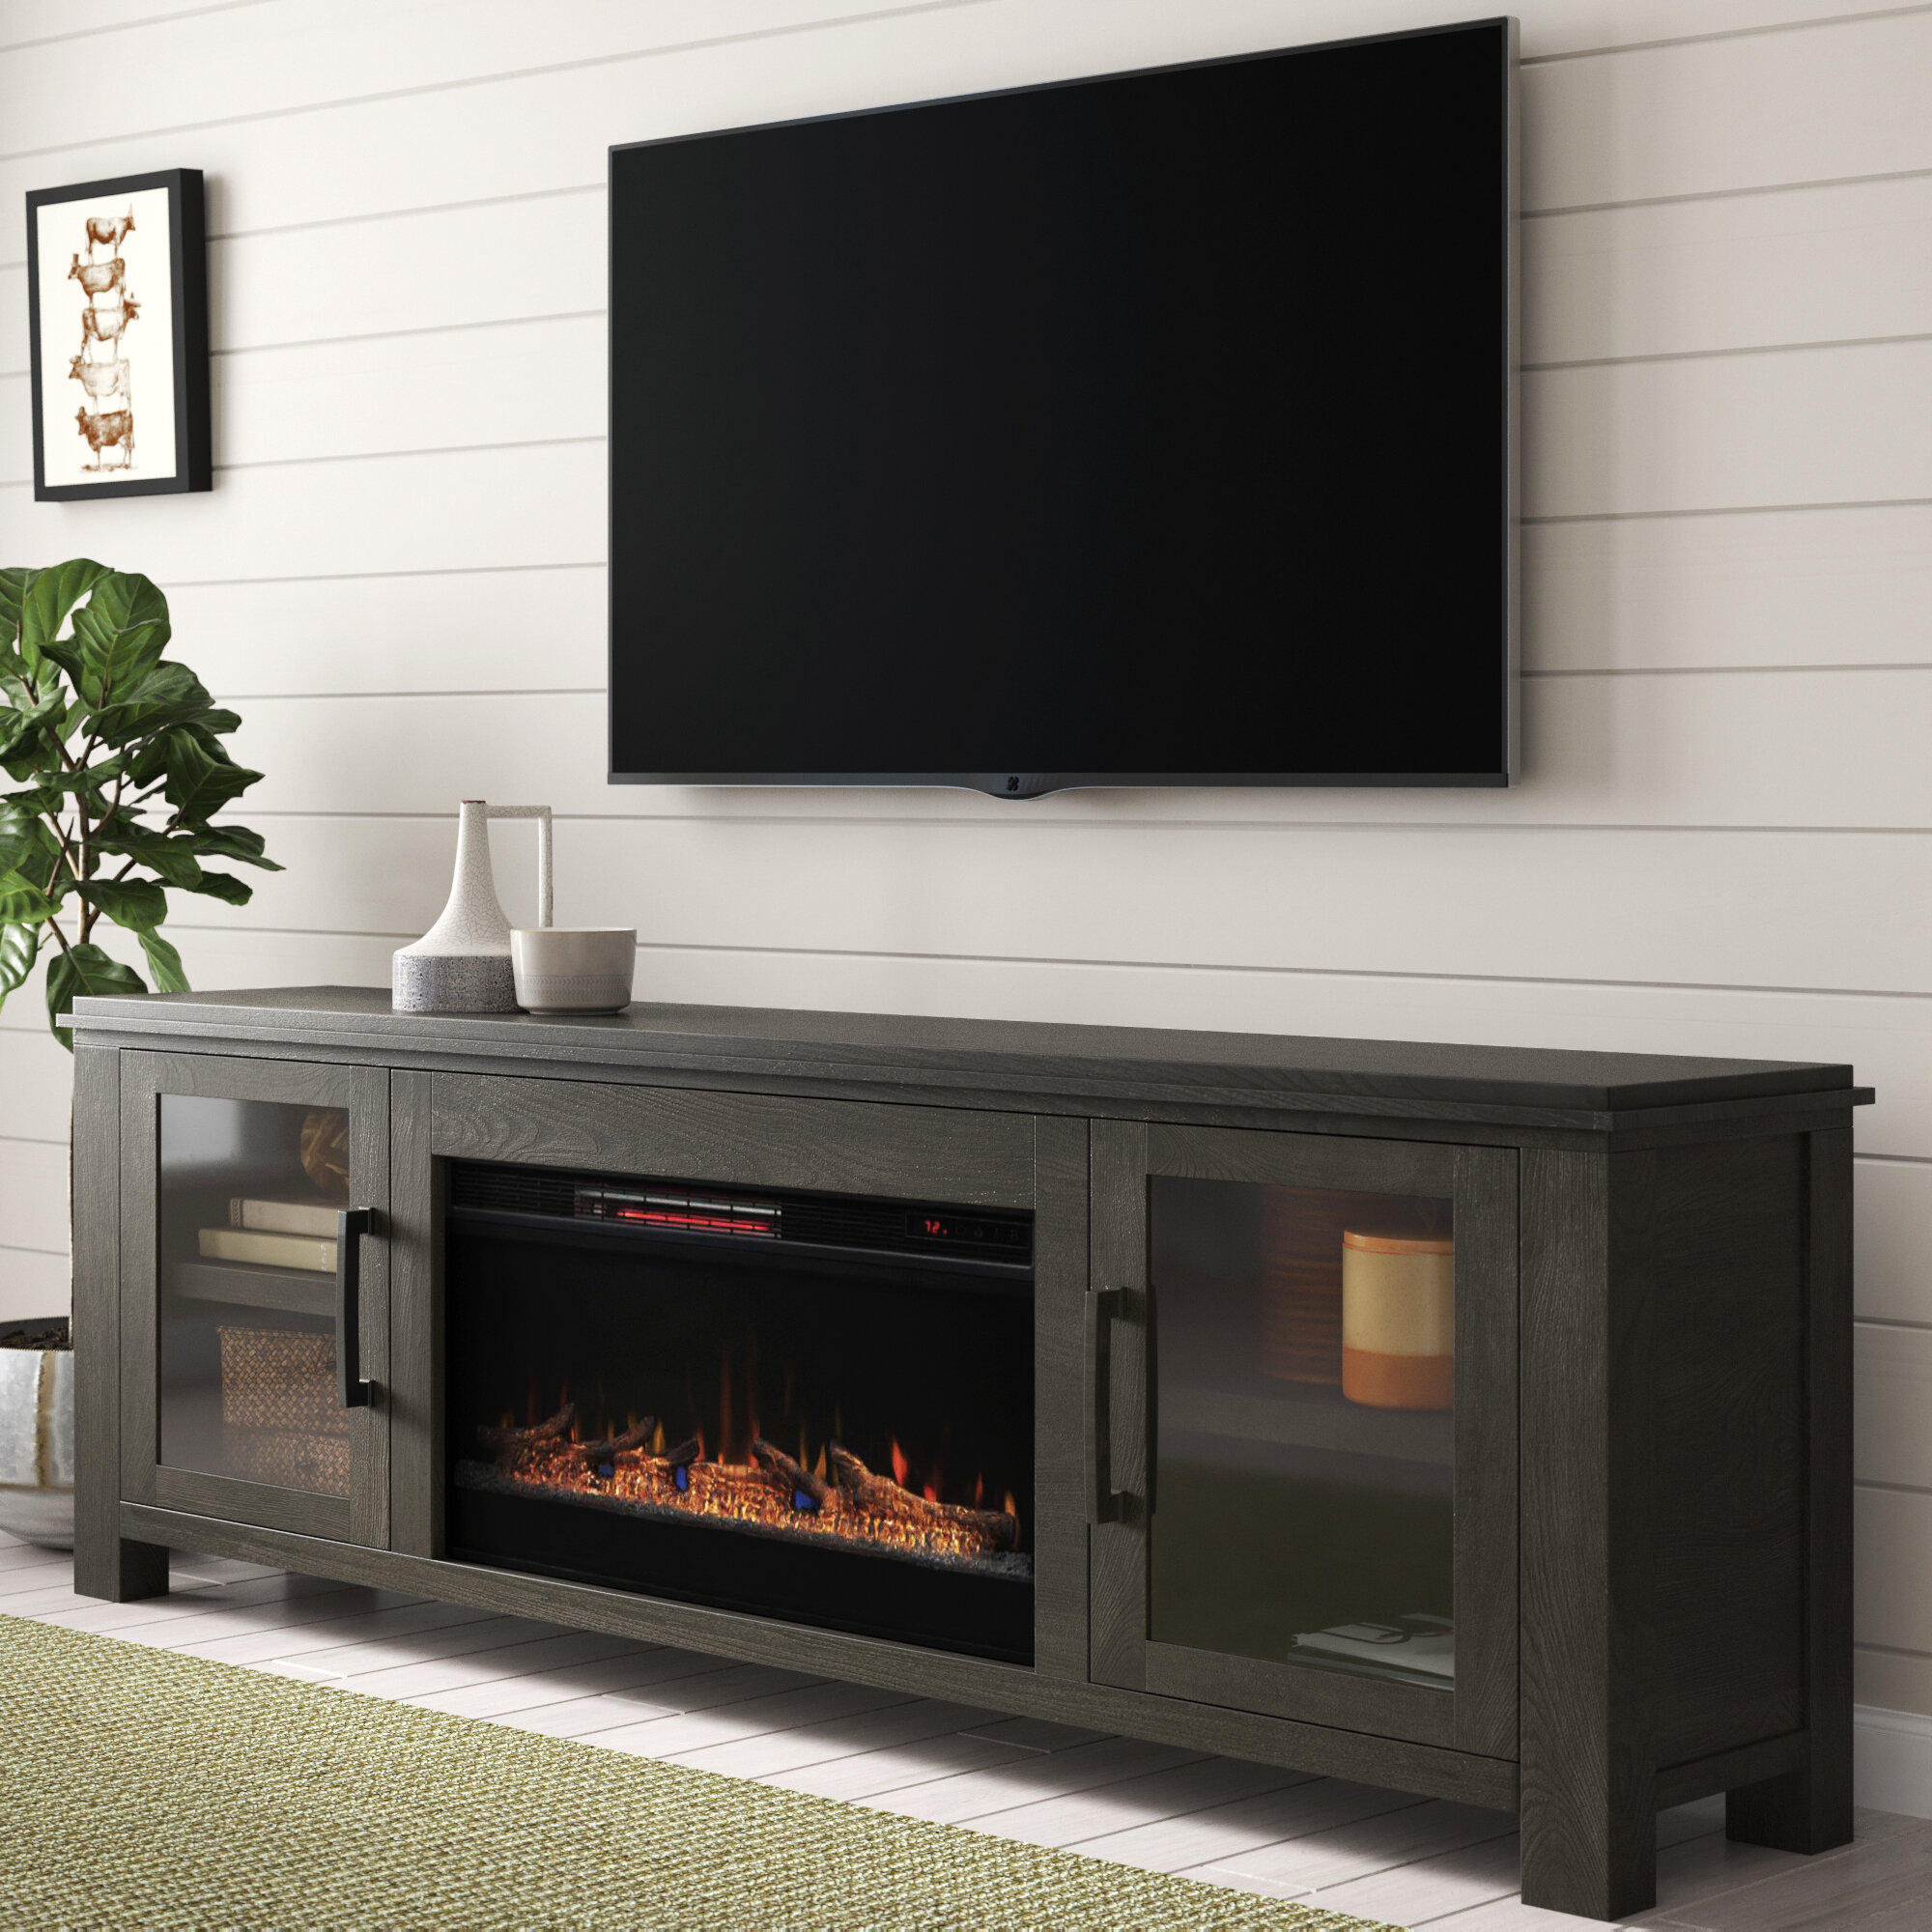 Fireplace Modern Farmhouse Tv Stands Entertainment Centers Youll Love In 2021 Wayfair